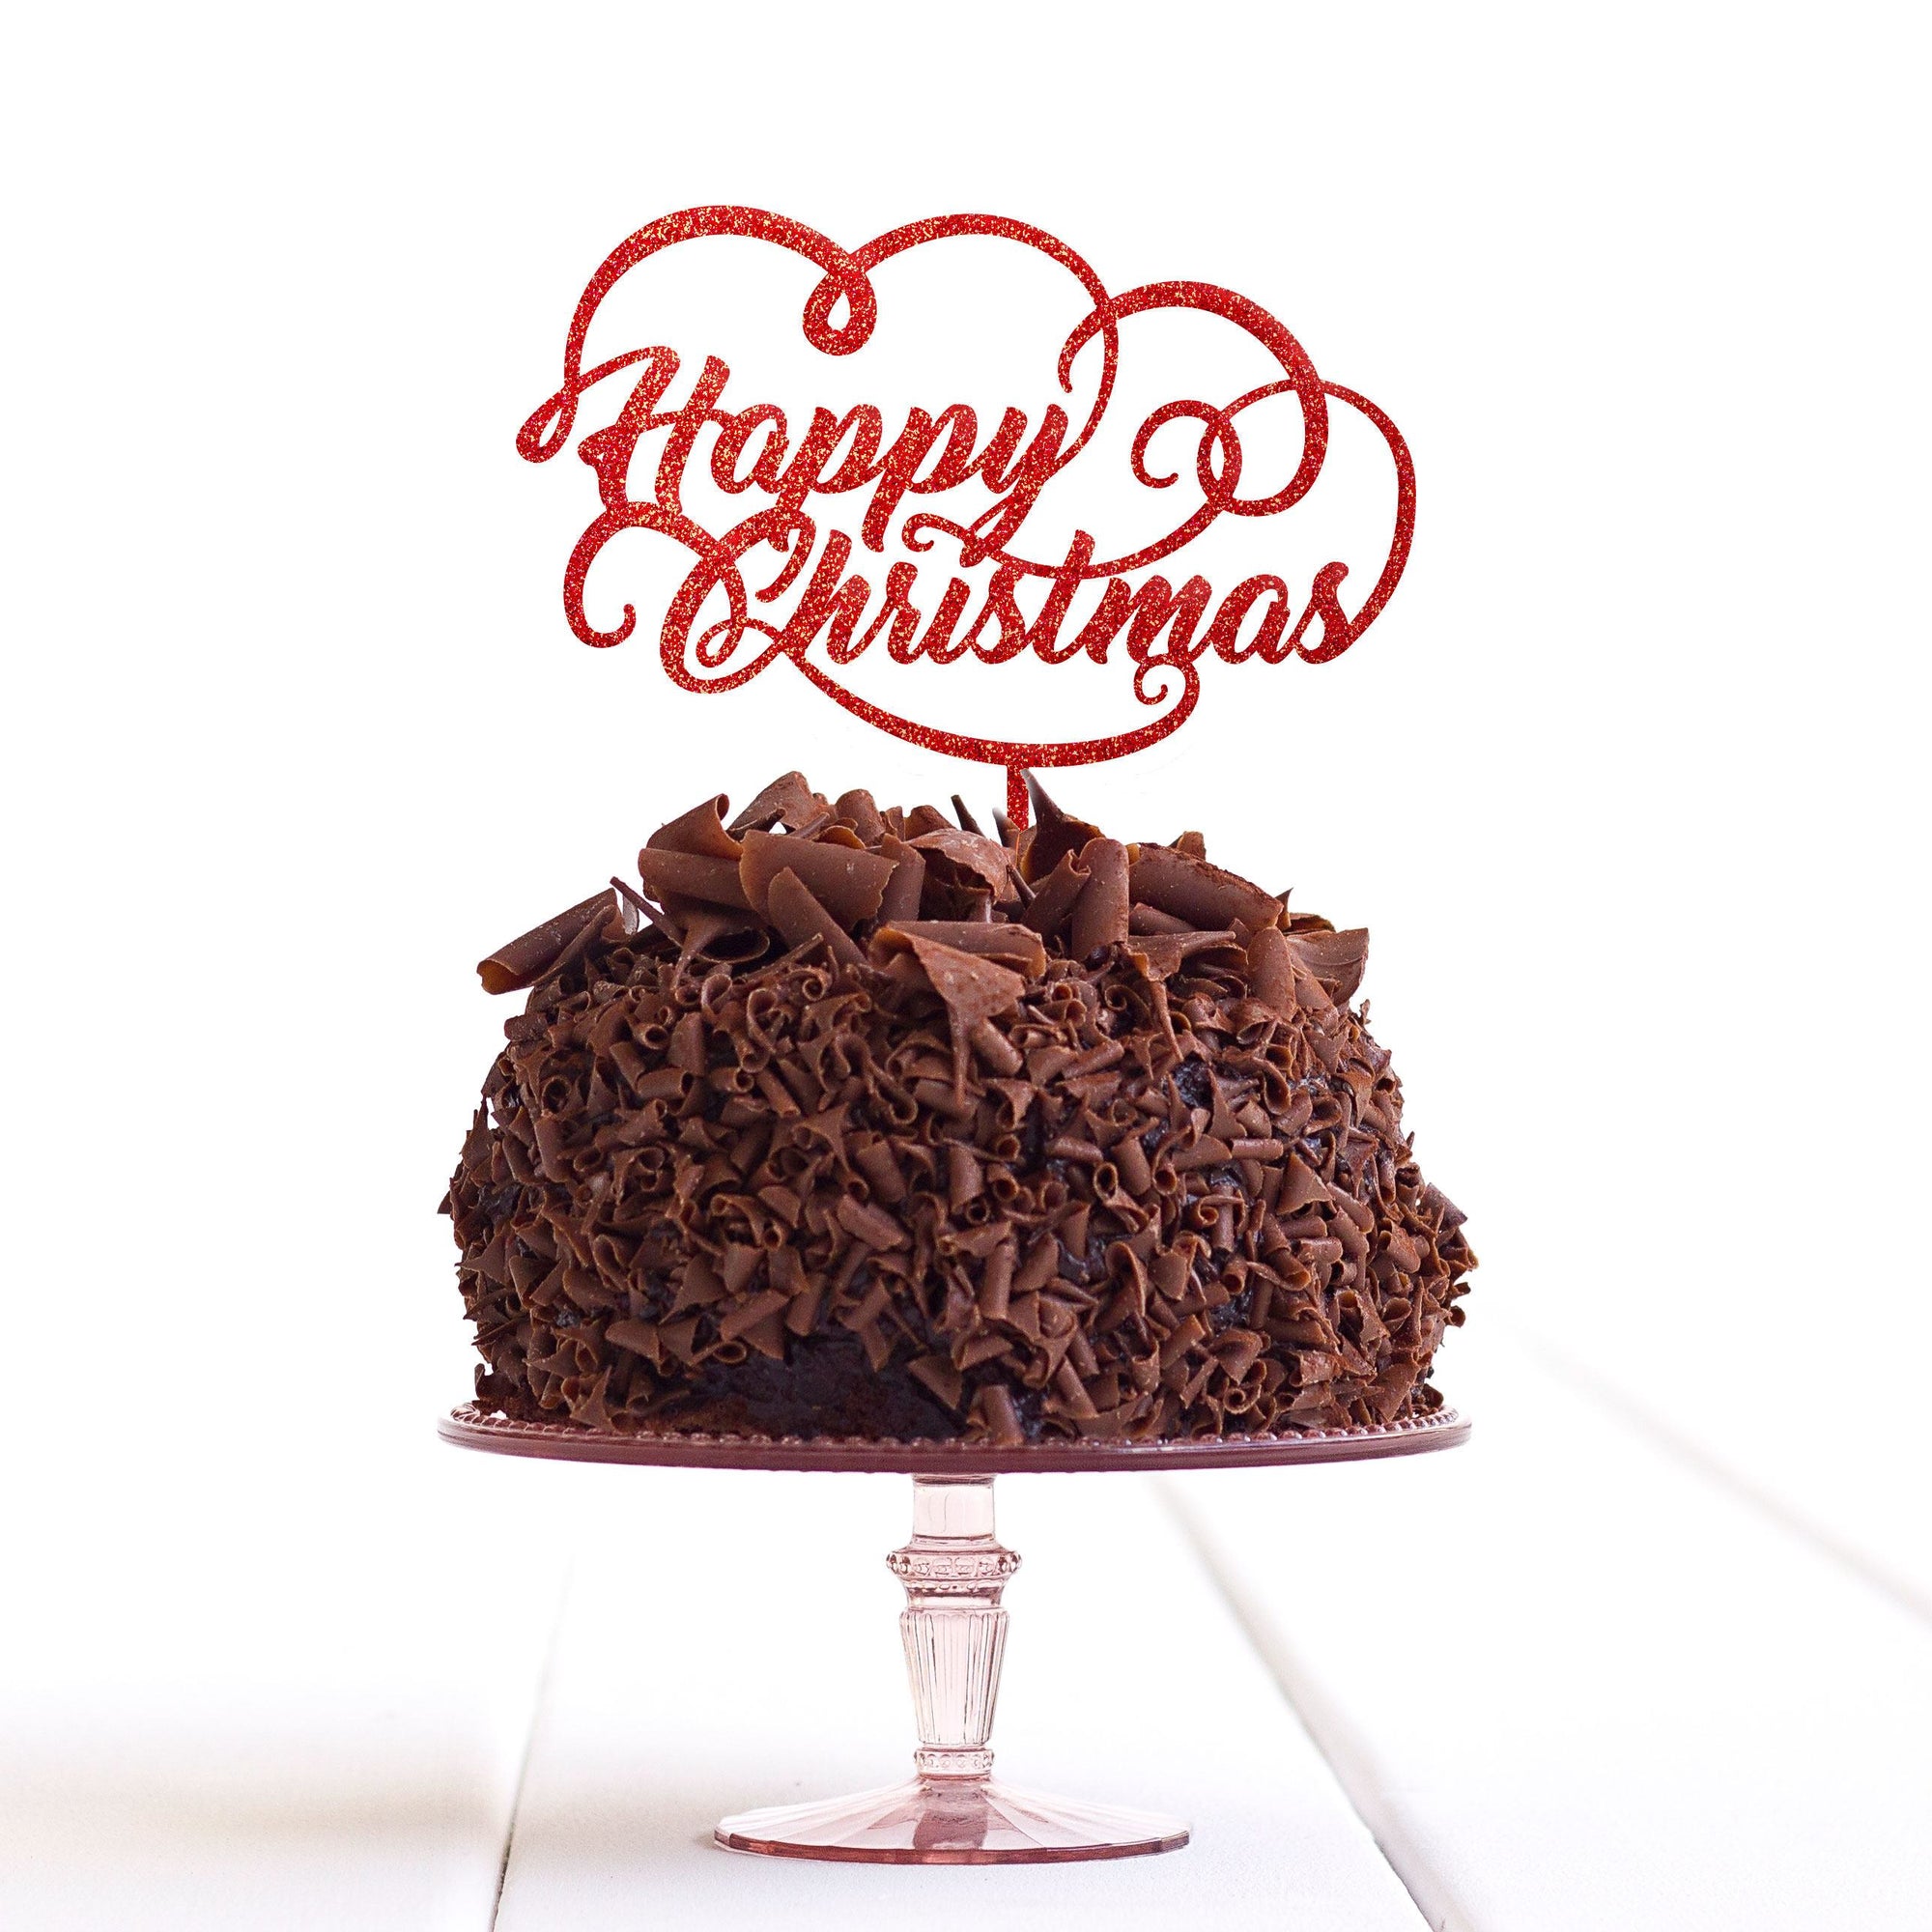 Happy Christmas Party Cake Topper Decoration - Happy Xmas Cake Topper - Christmas C Decoration - Quick Worldwide Despatch - DirectlyPersonalised